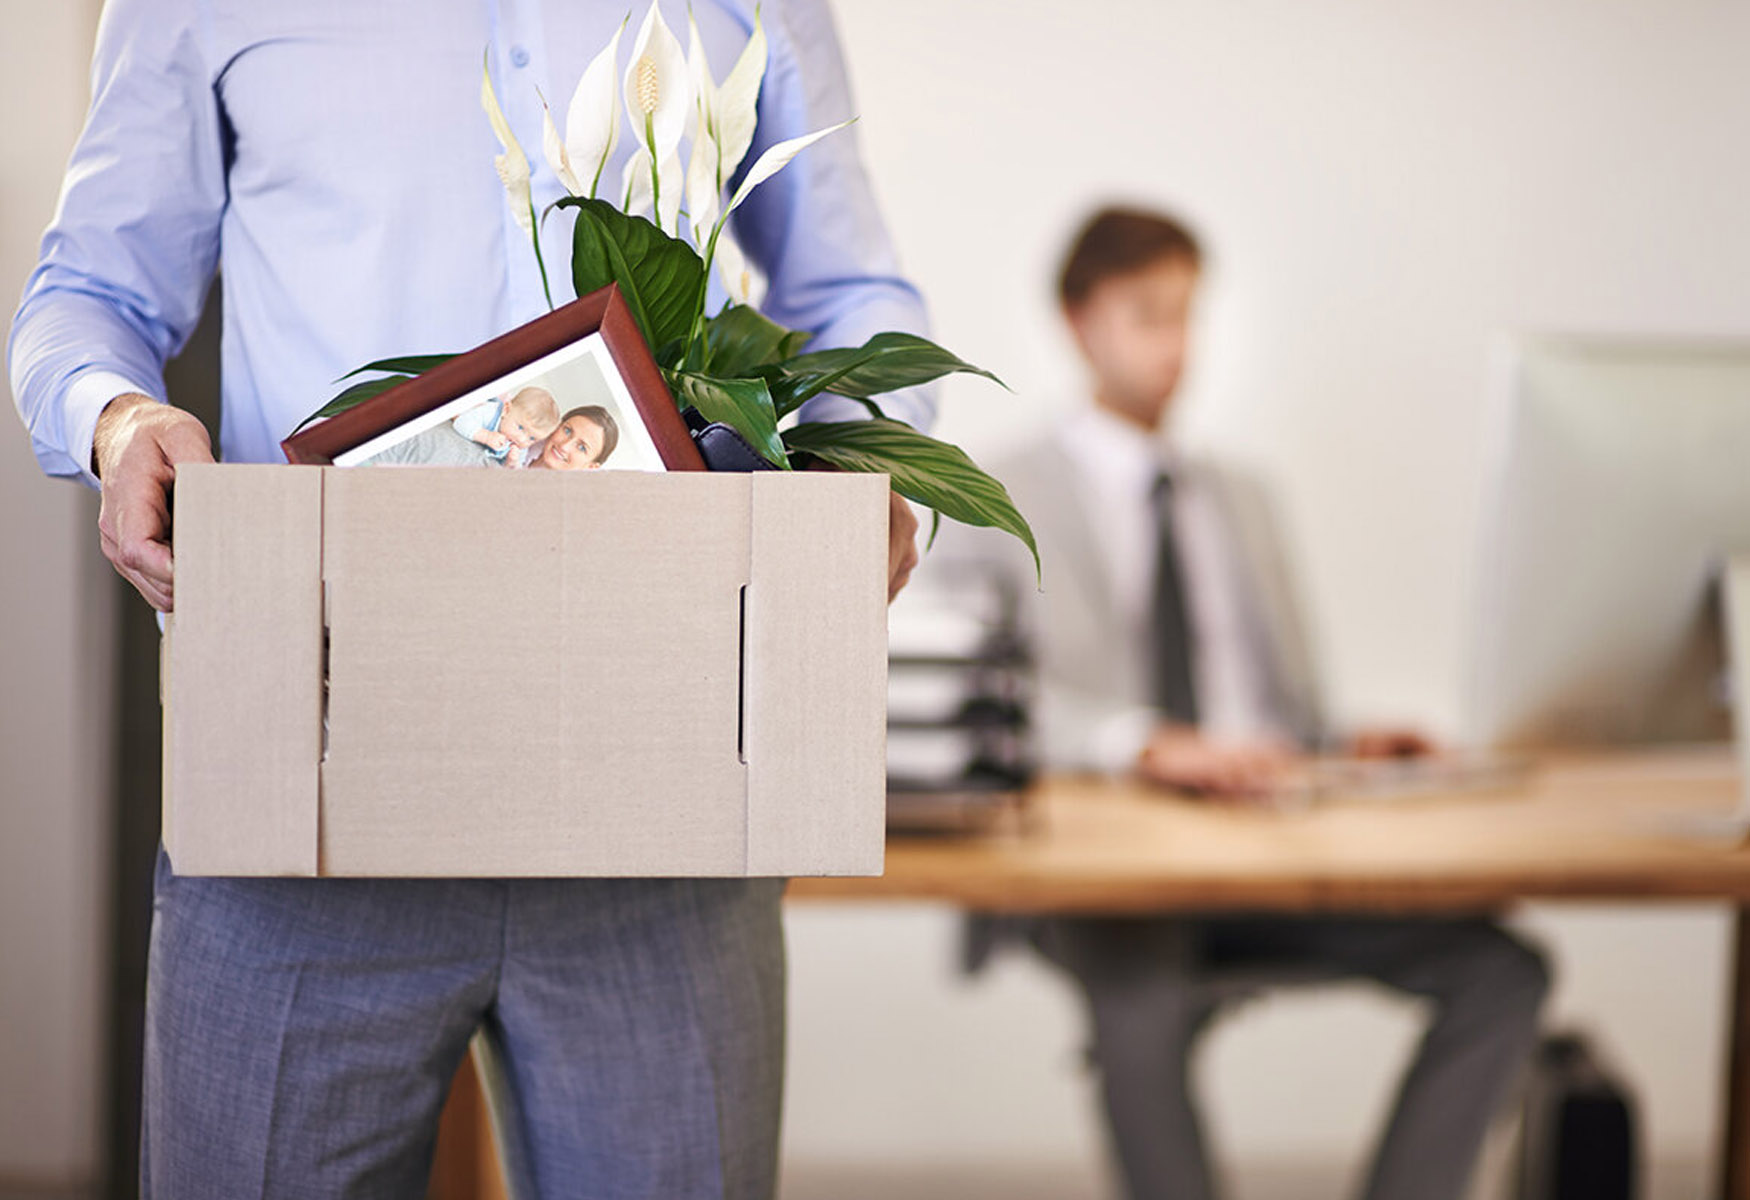 Managing Layoffs Compassionately During The Holiday Season